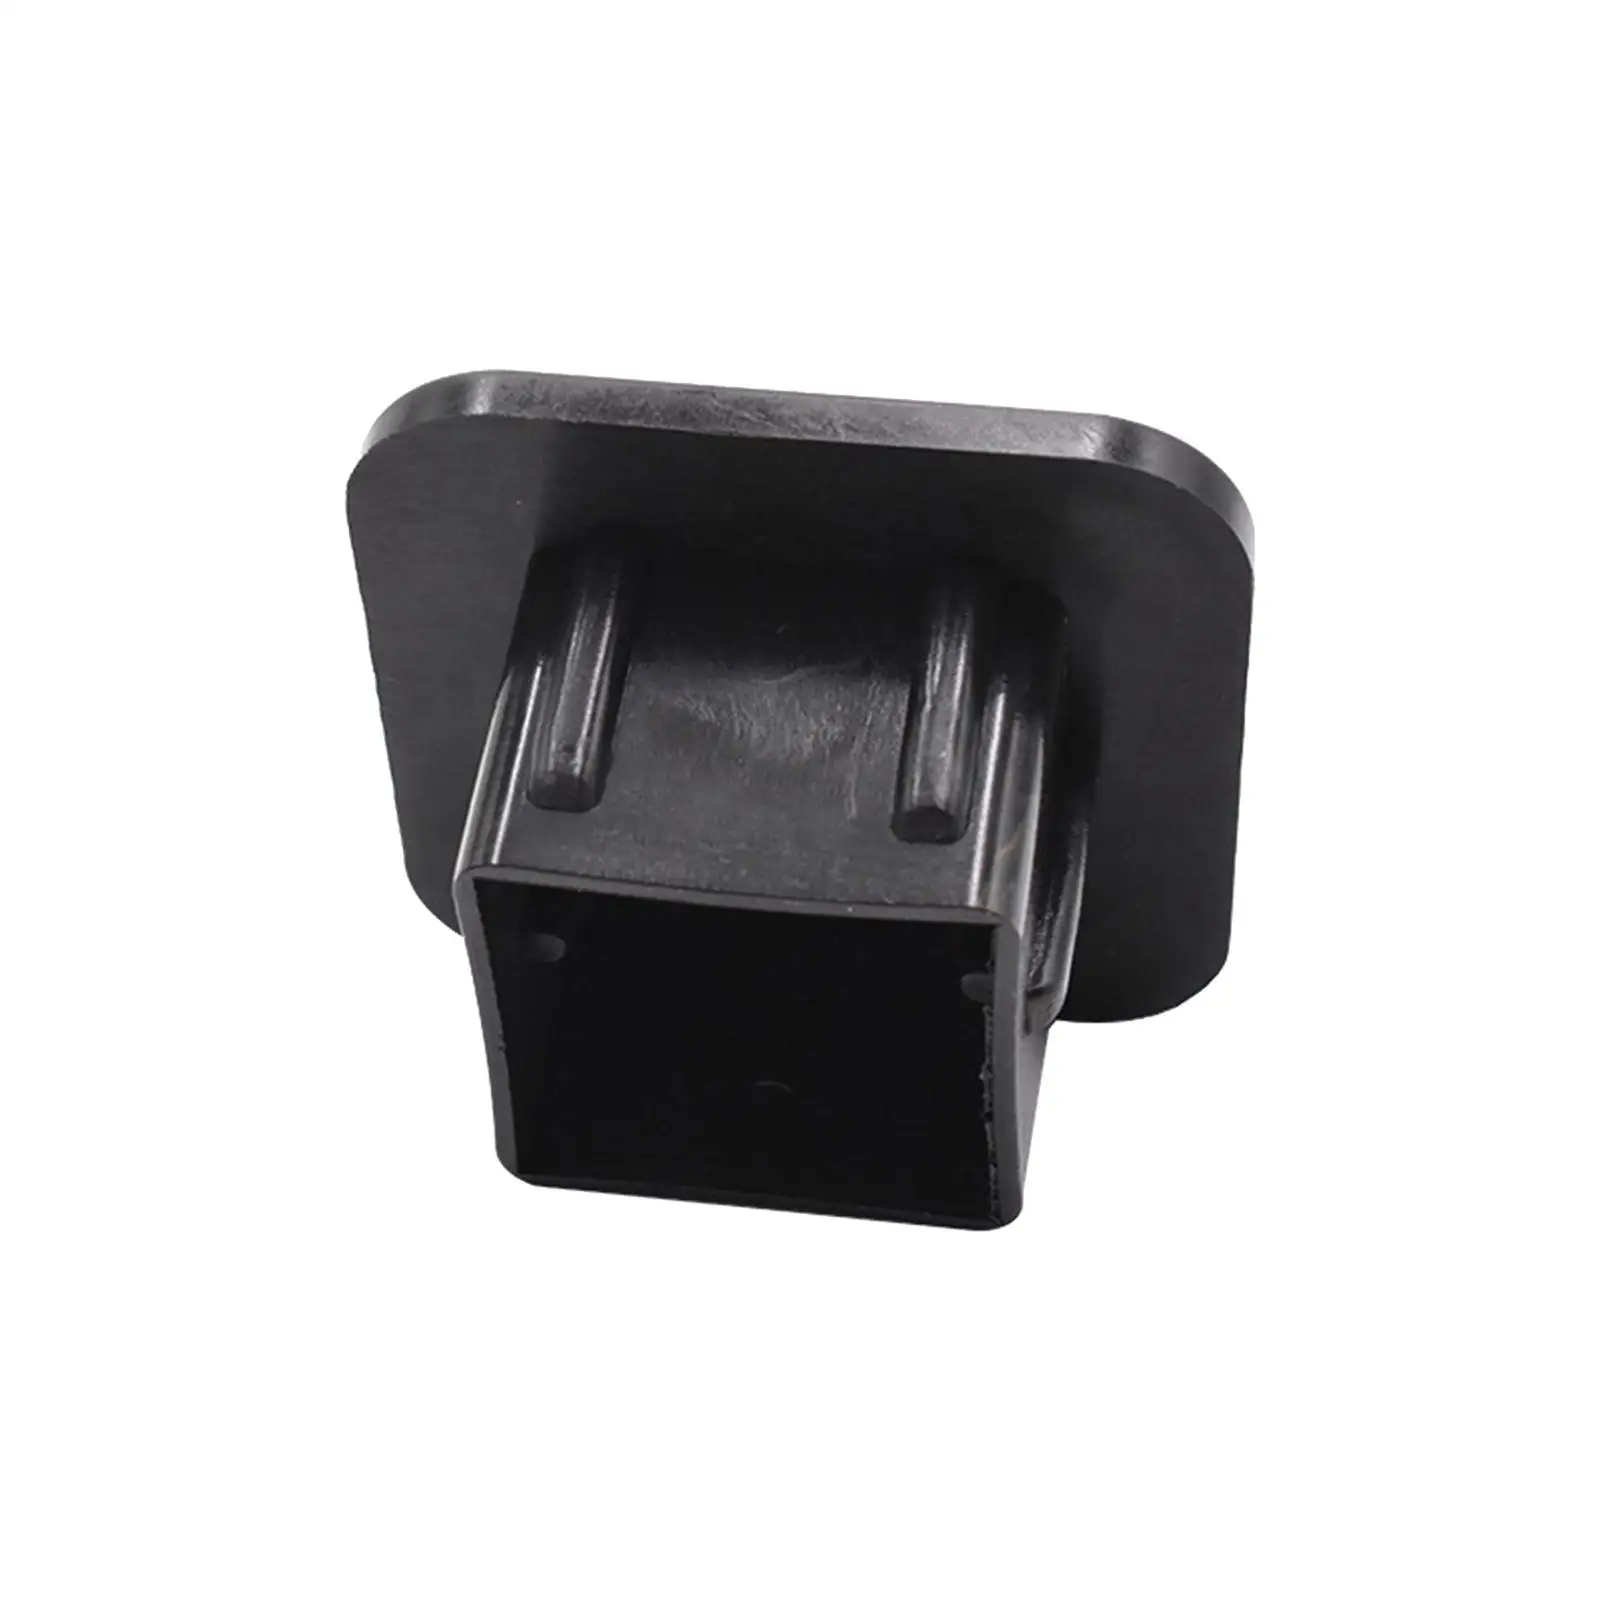 American Trailer Hitch Cover Tube Plug Insert Car Accessories Square Mouth Cover Protector Cap